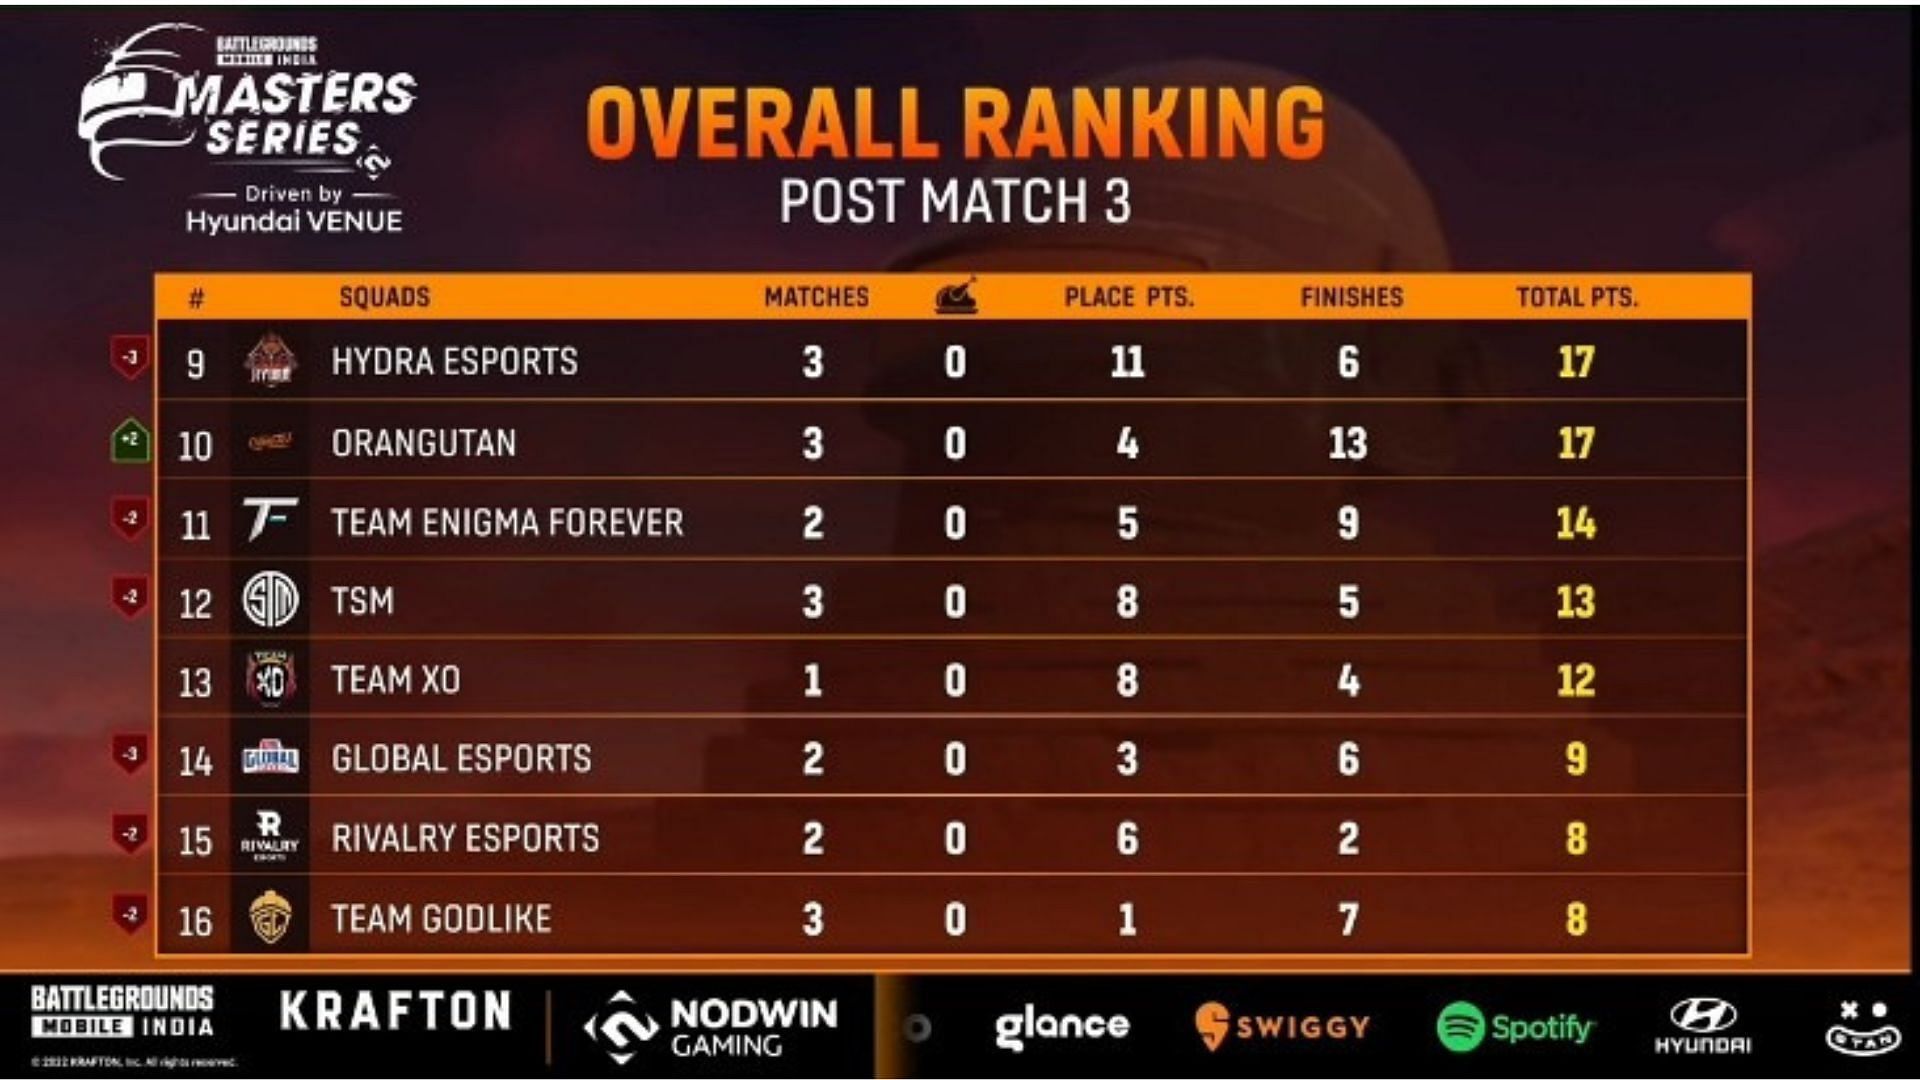 TSM finished 12th after BGMI Masters Week 2 Day 1 (image via Loco)